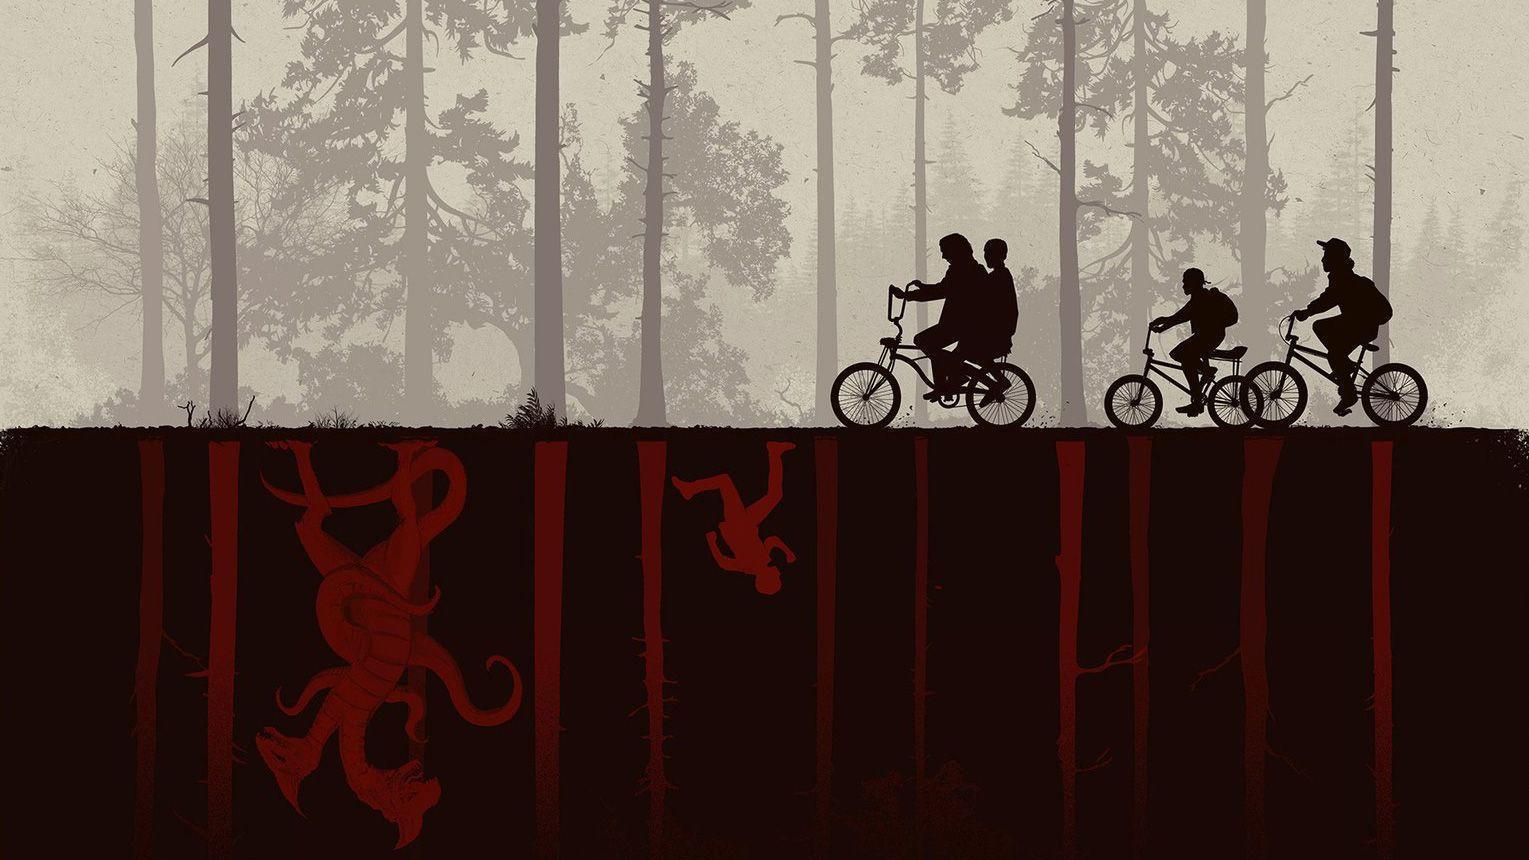 fantastic pieces of Stranger Things art